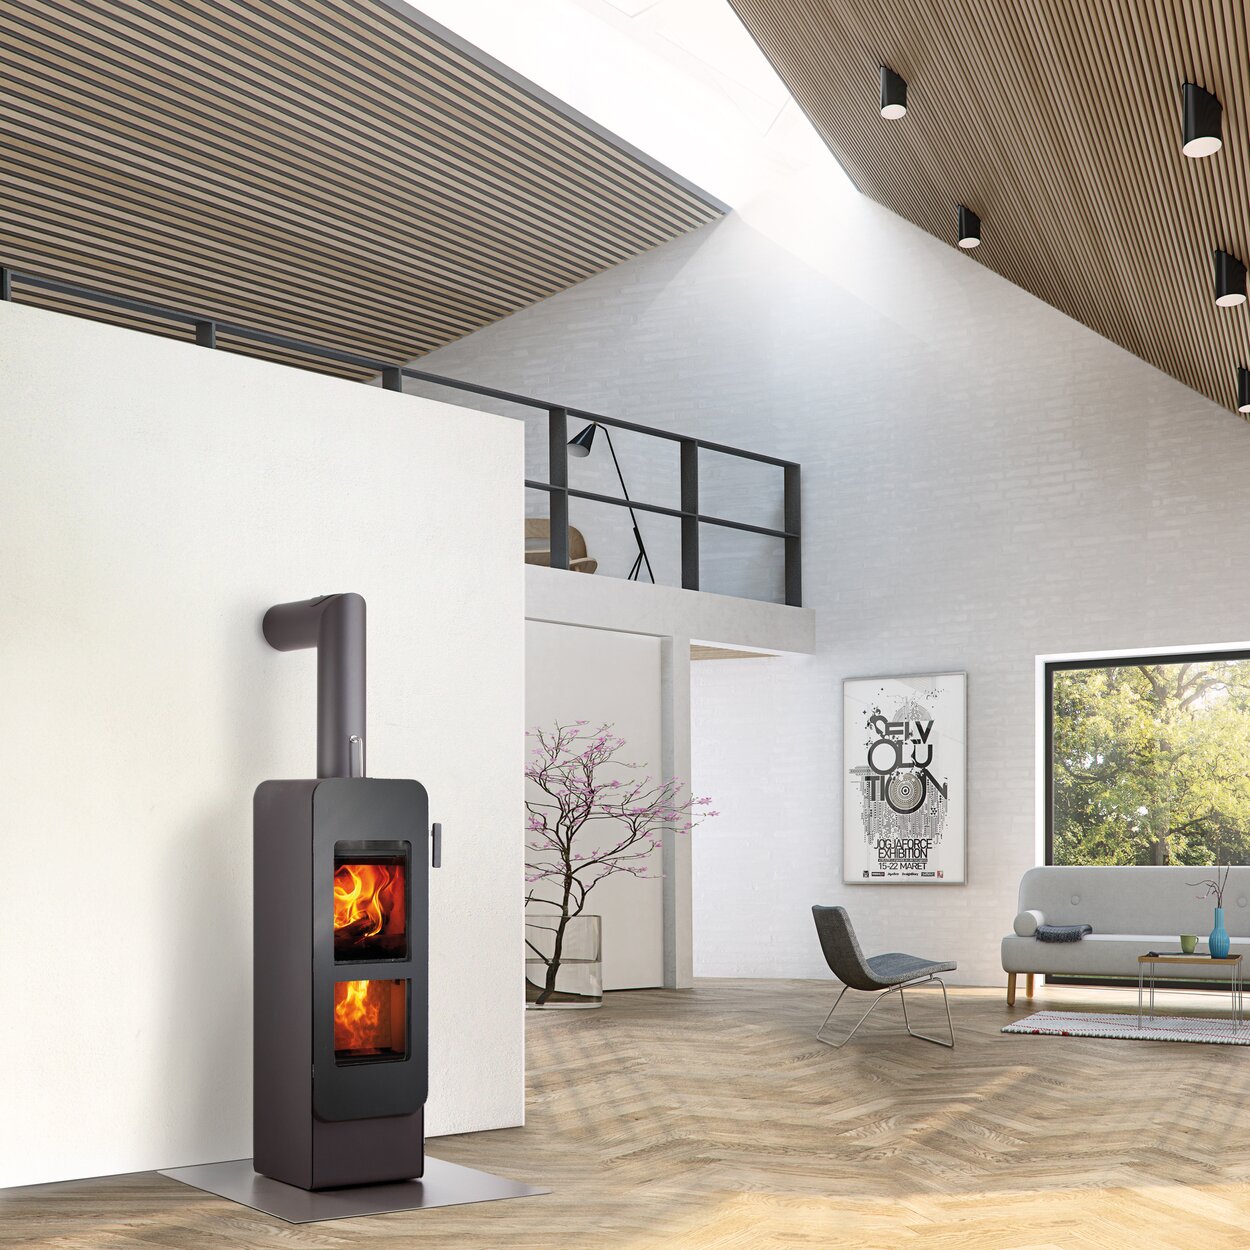 Wood stove bionic fire EVO in the colour black with steel door in a modern loft design